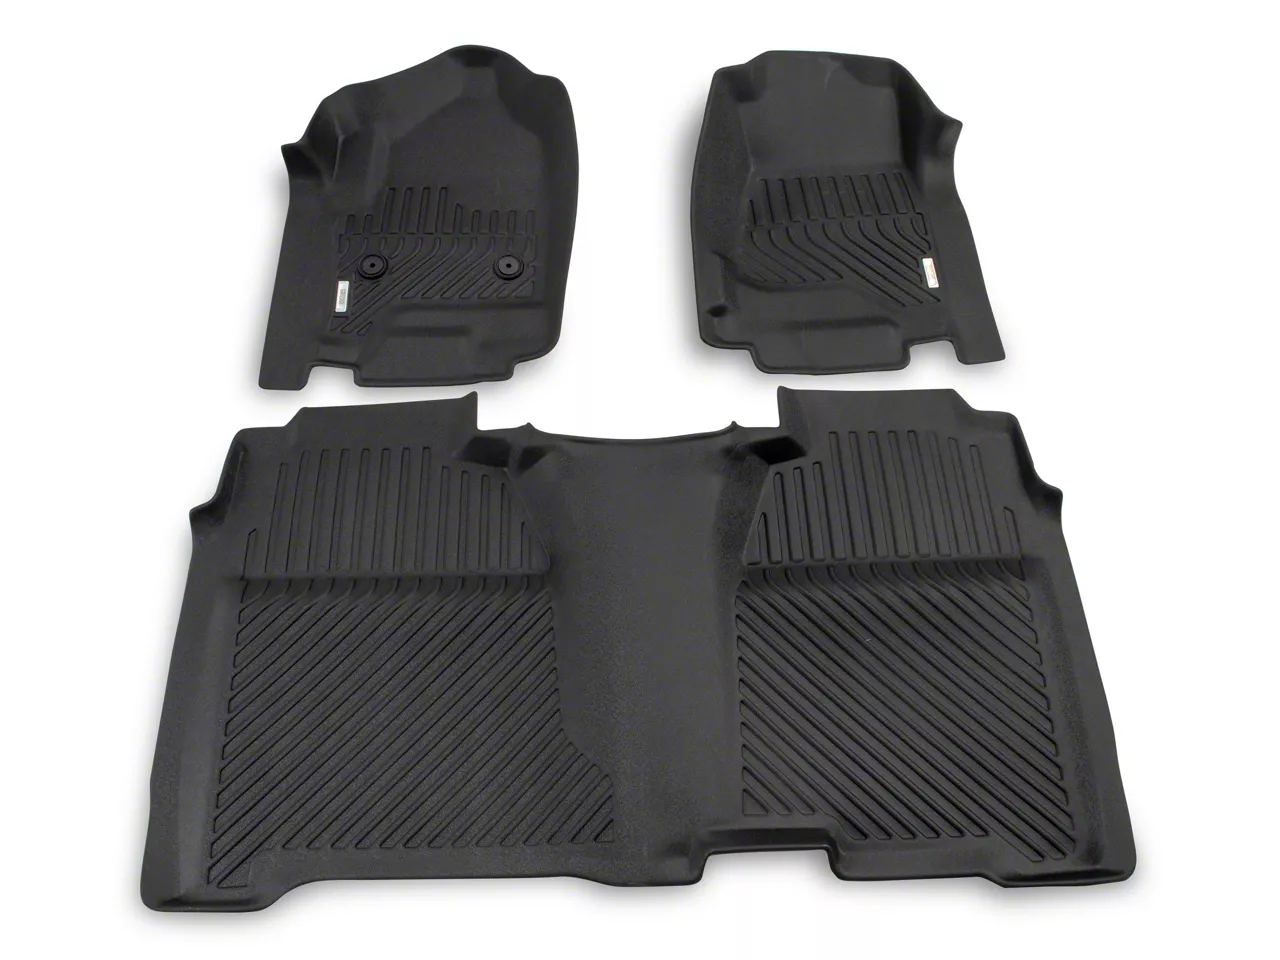 A Closer Look At The GMC Sierra's All-Weather Floor Liners